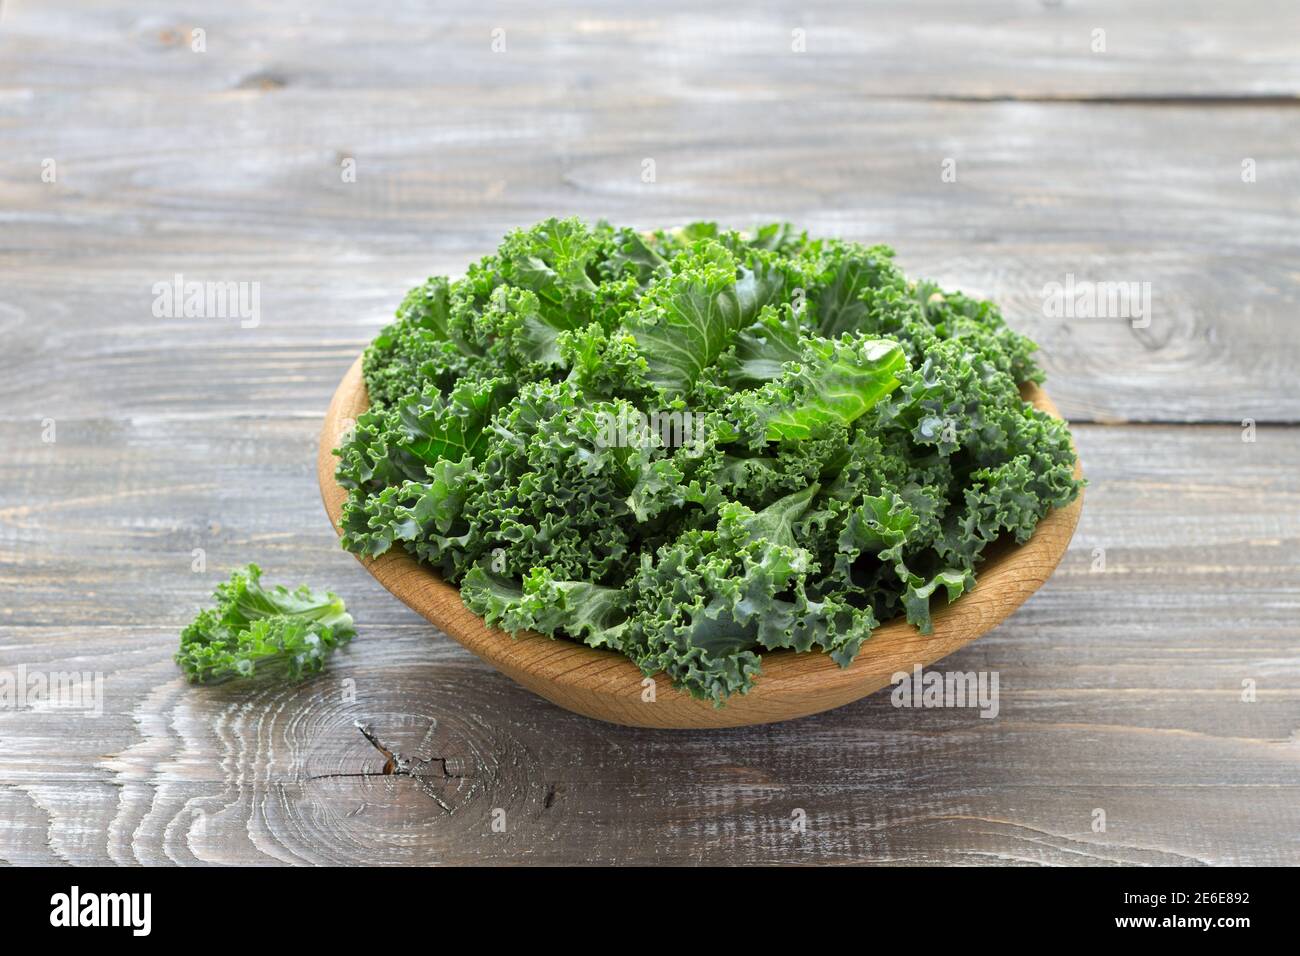 Fresh green curly kale leaves on a wooden table. selective focus. rustic style. healthy vegetarian food Stock Photo